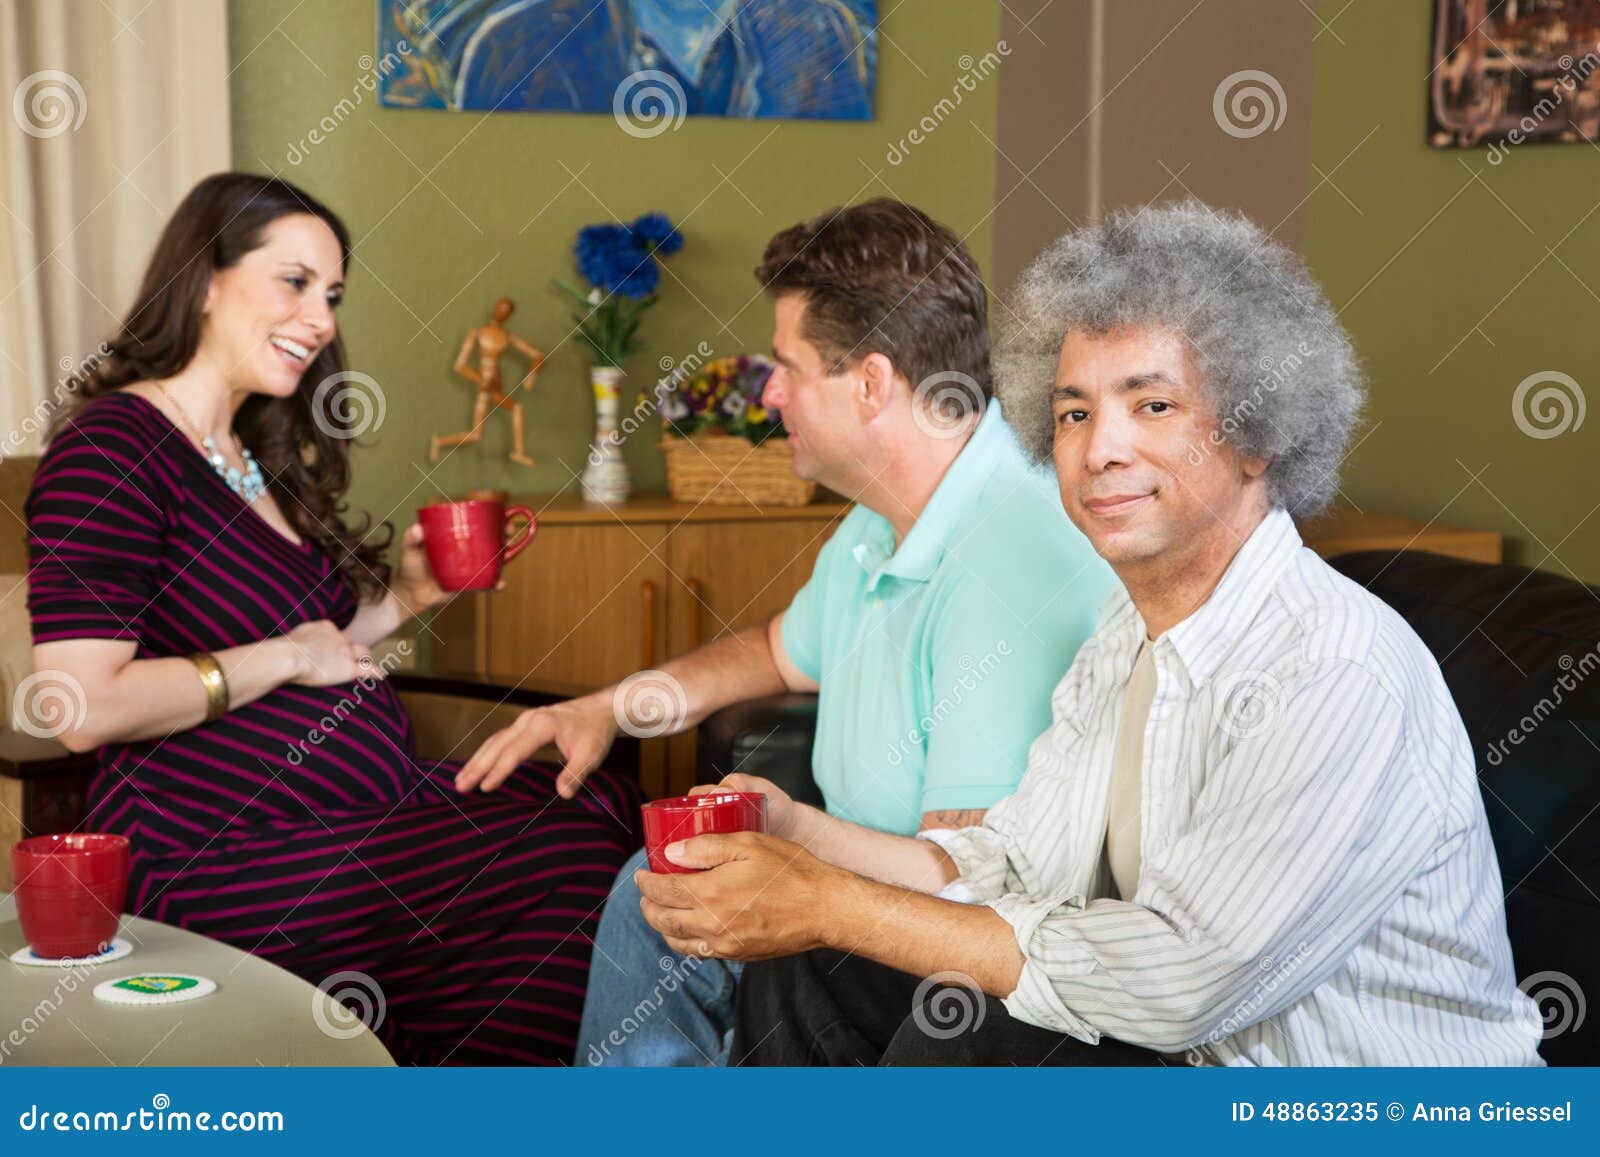 Surrogate Mother with Two Same Sex Parents Stock Image picture